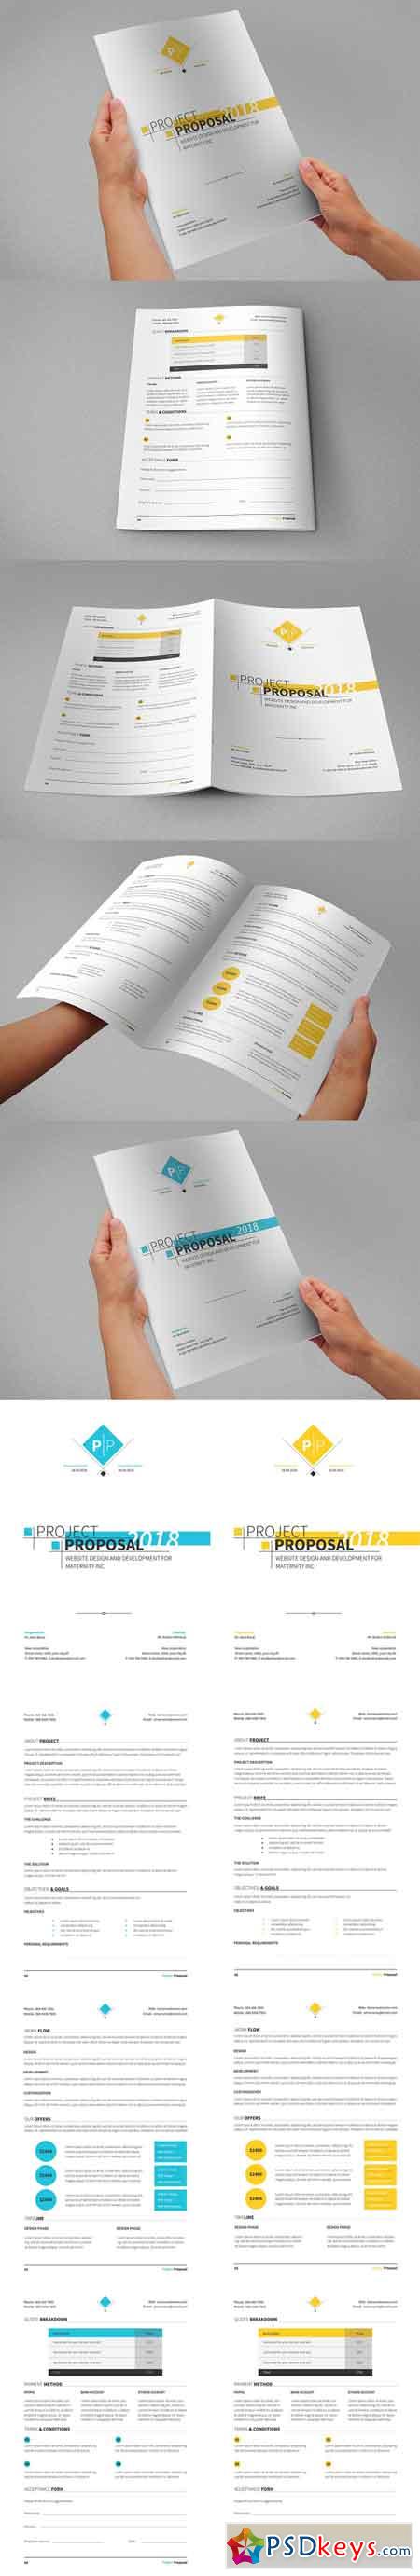 Project Proposal Template 2554769